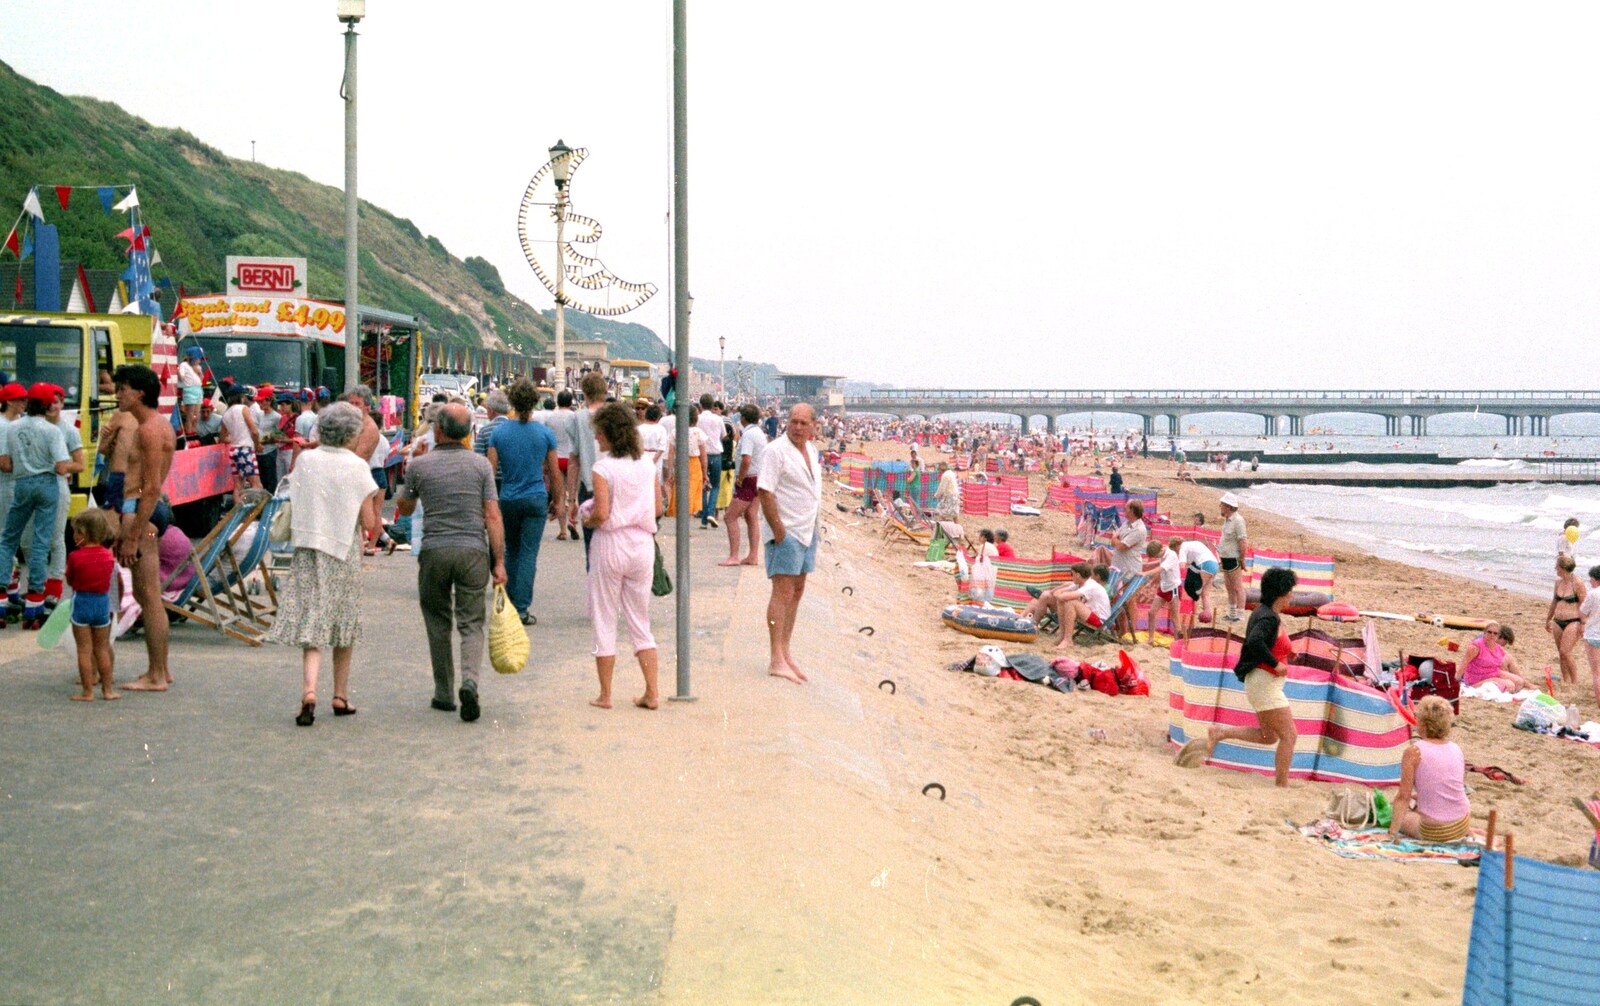 Bournemouth beach from McCarthy and Stone and the Bournemouth Carnival, Dorset - 8th August 1986